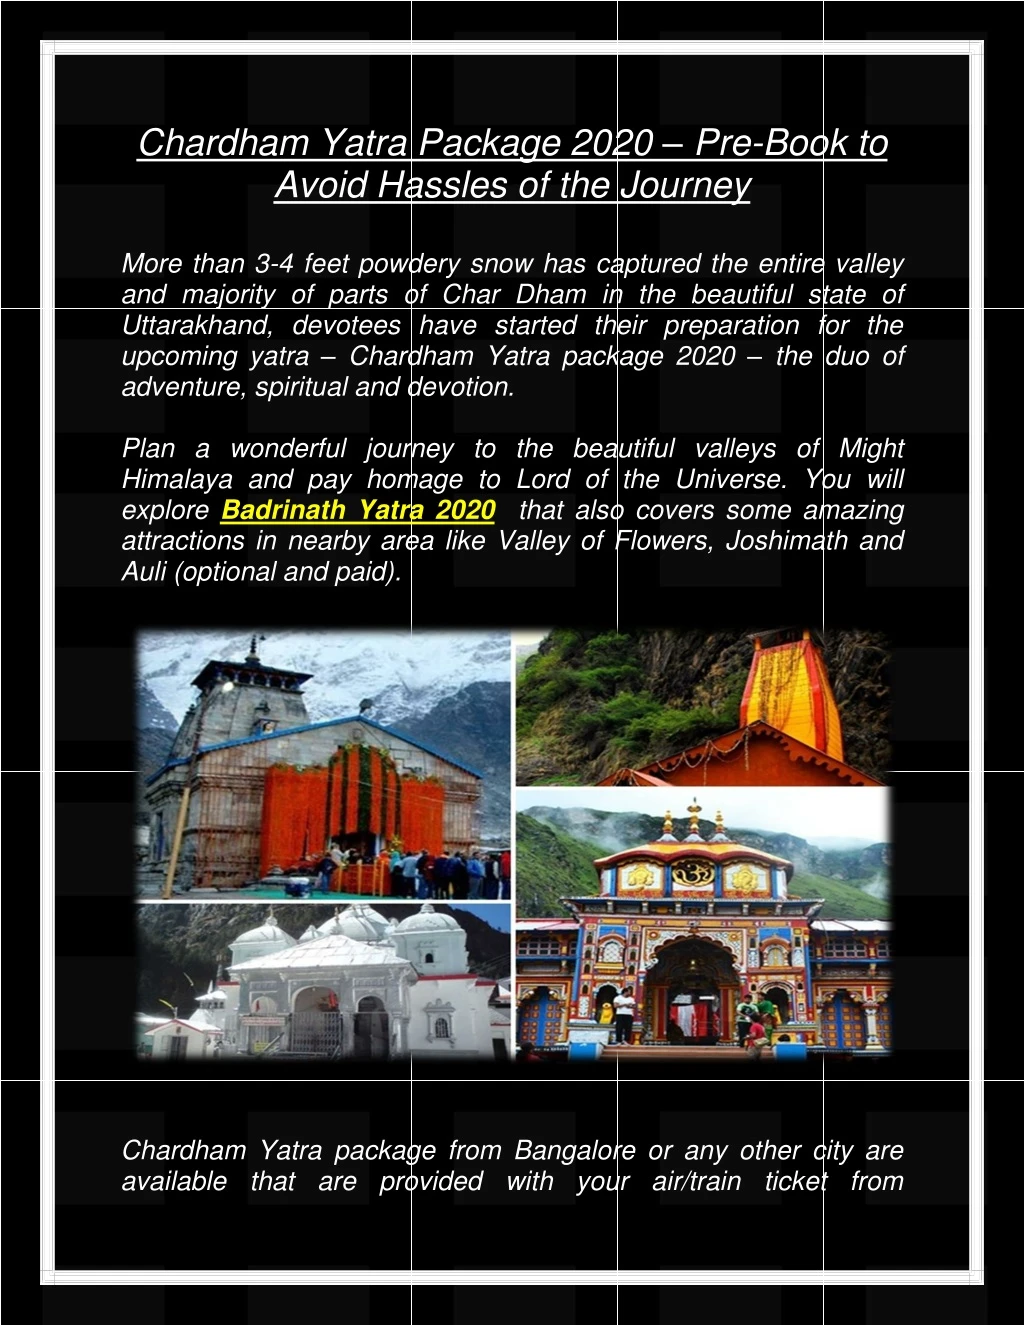 chardham yatra package 2020 pre book to avoid